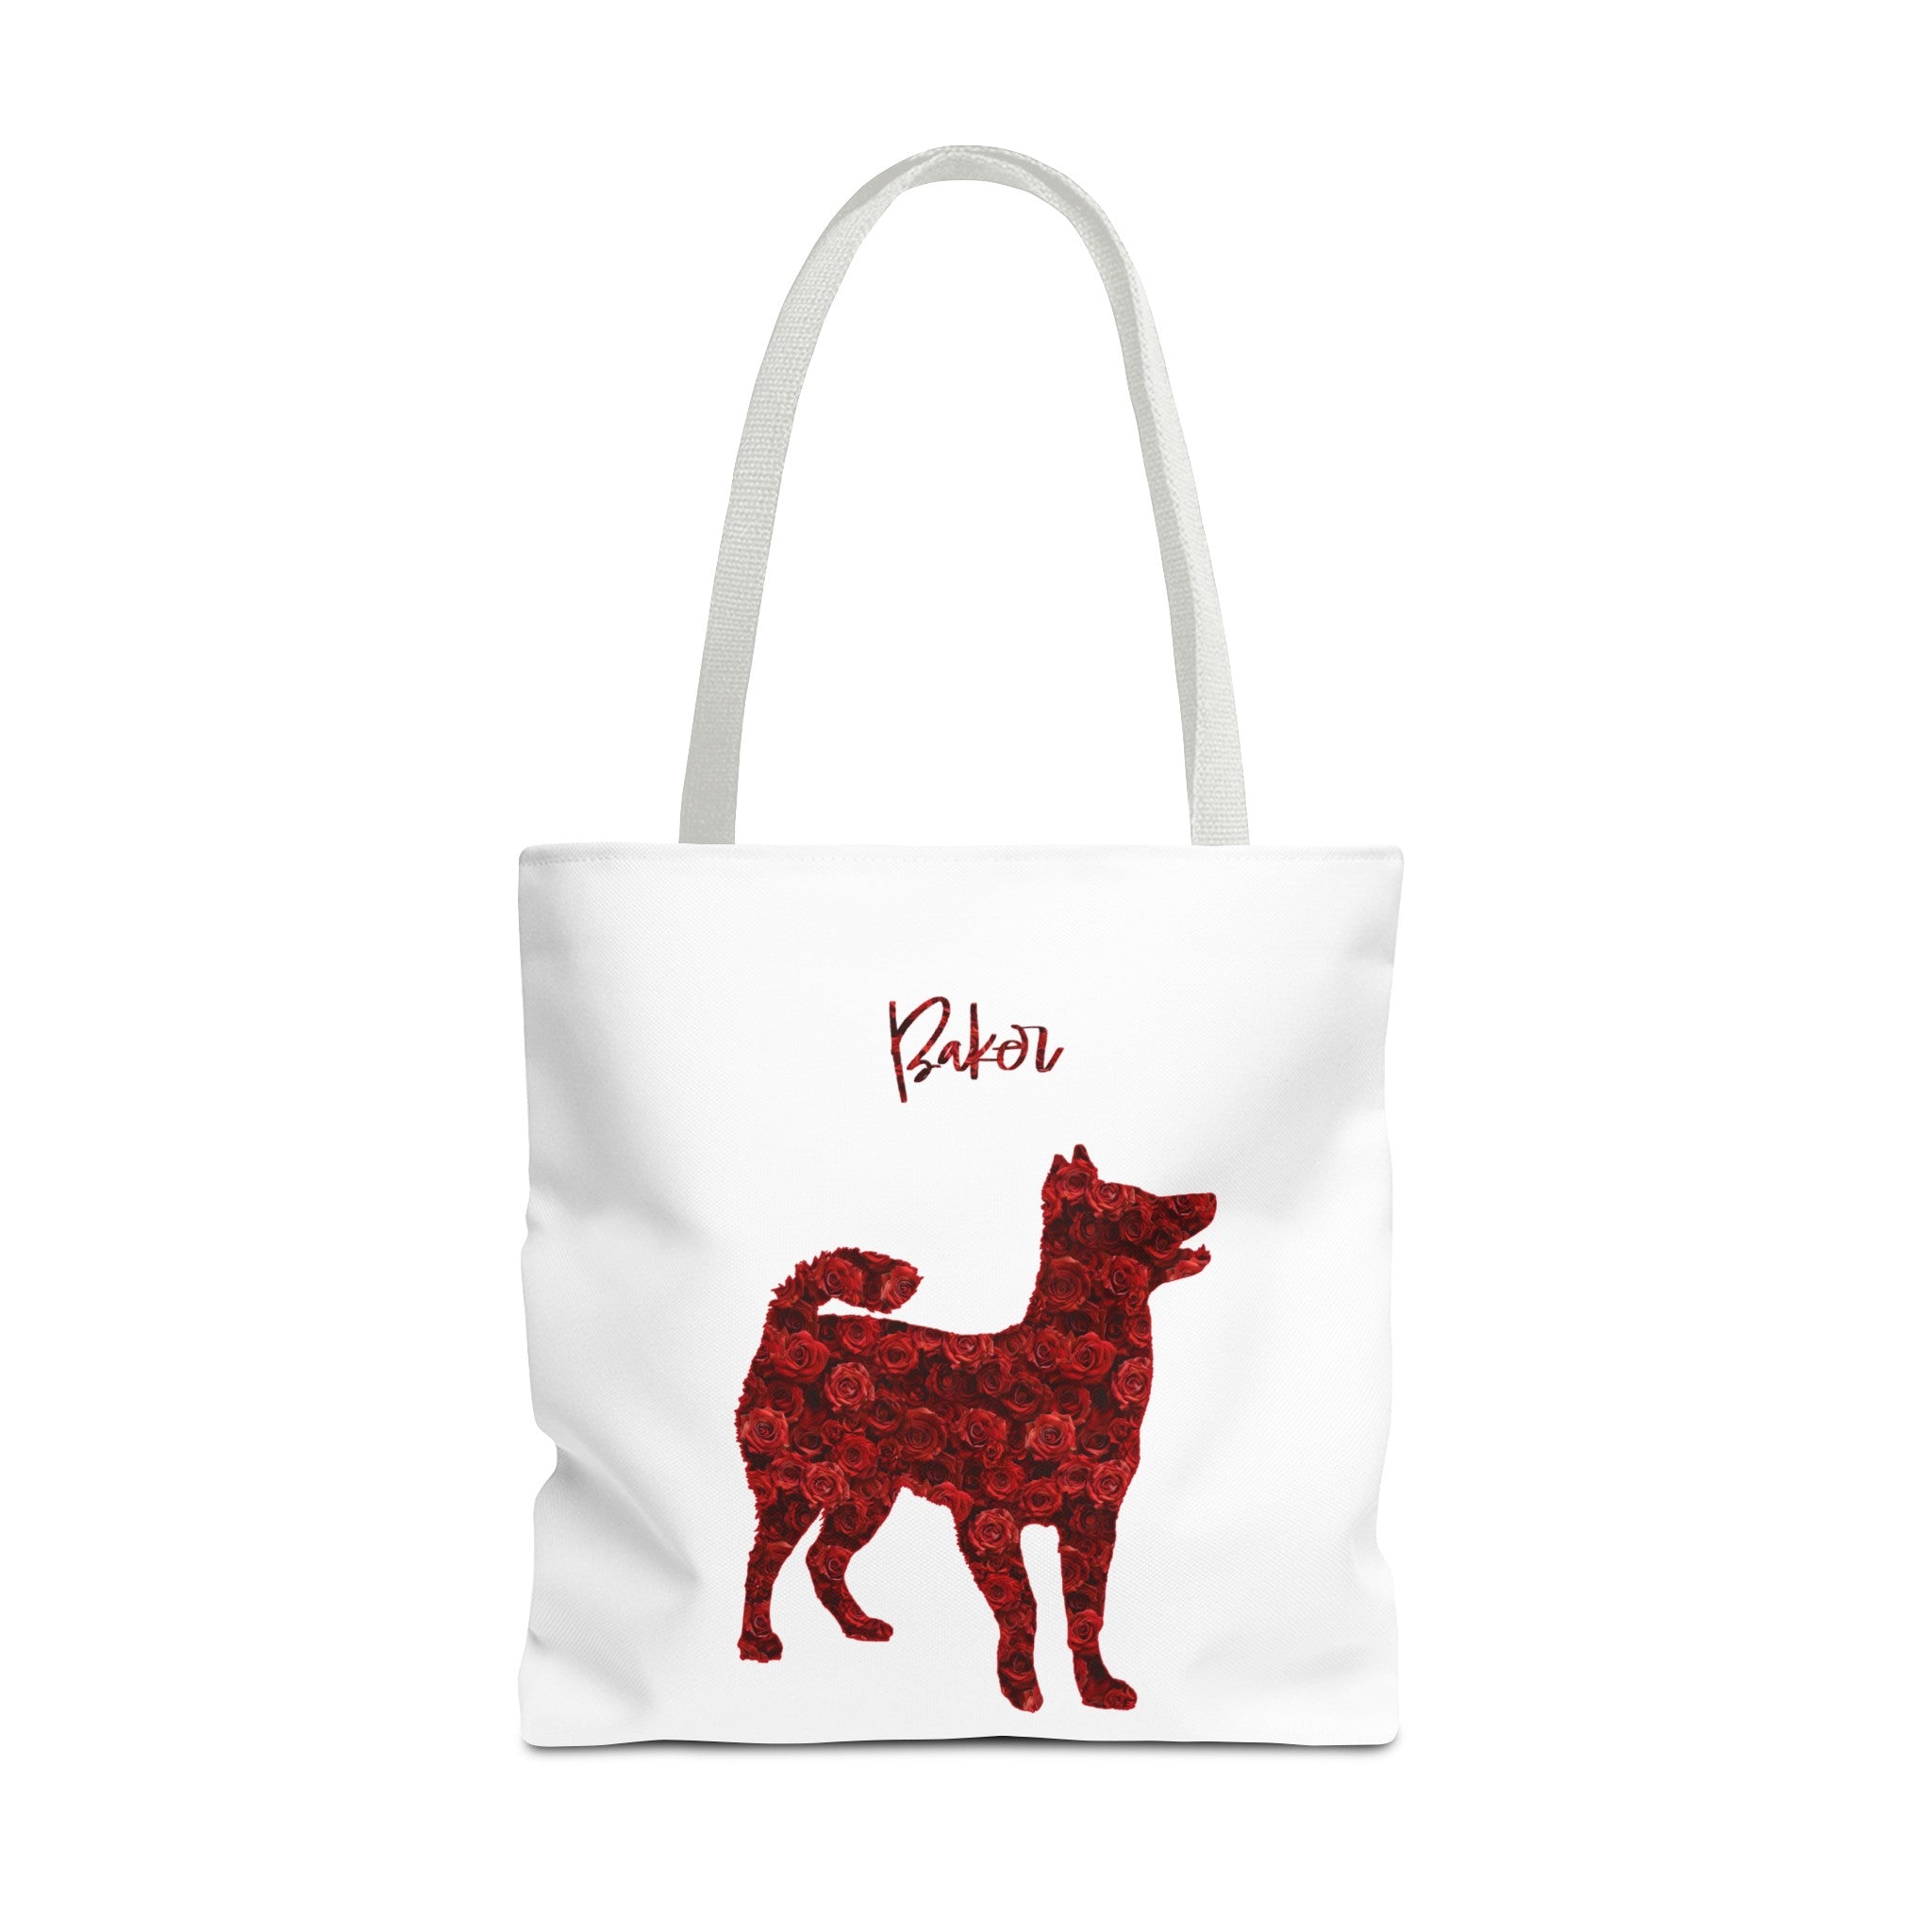 Personalized Red Rose Dog Silhouette Flower Art Tote Bag - Upload Your Photo - personalized-red-rose-dog-silhouette-flower-art-tote